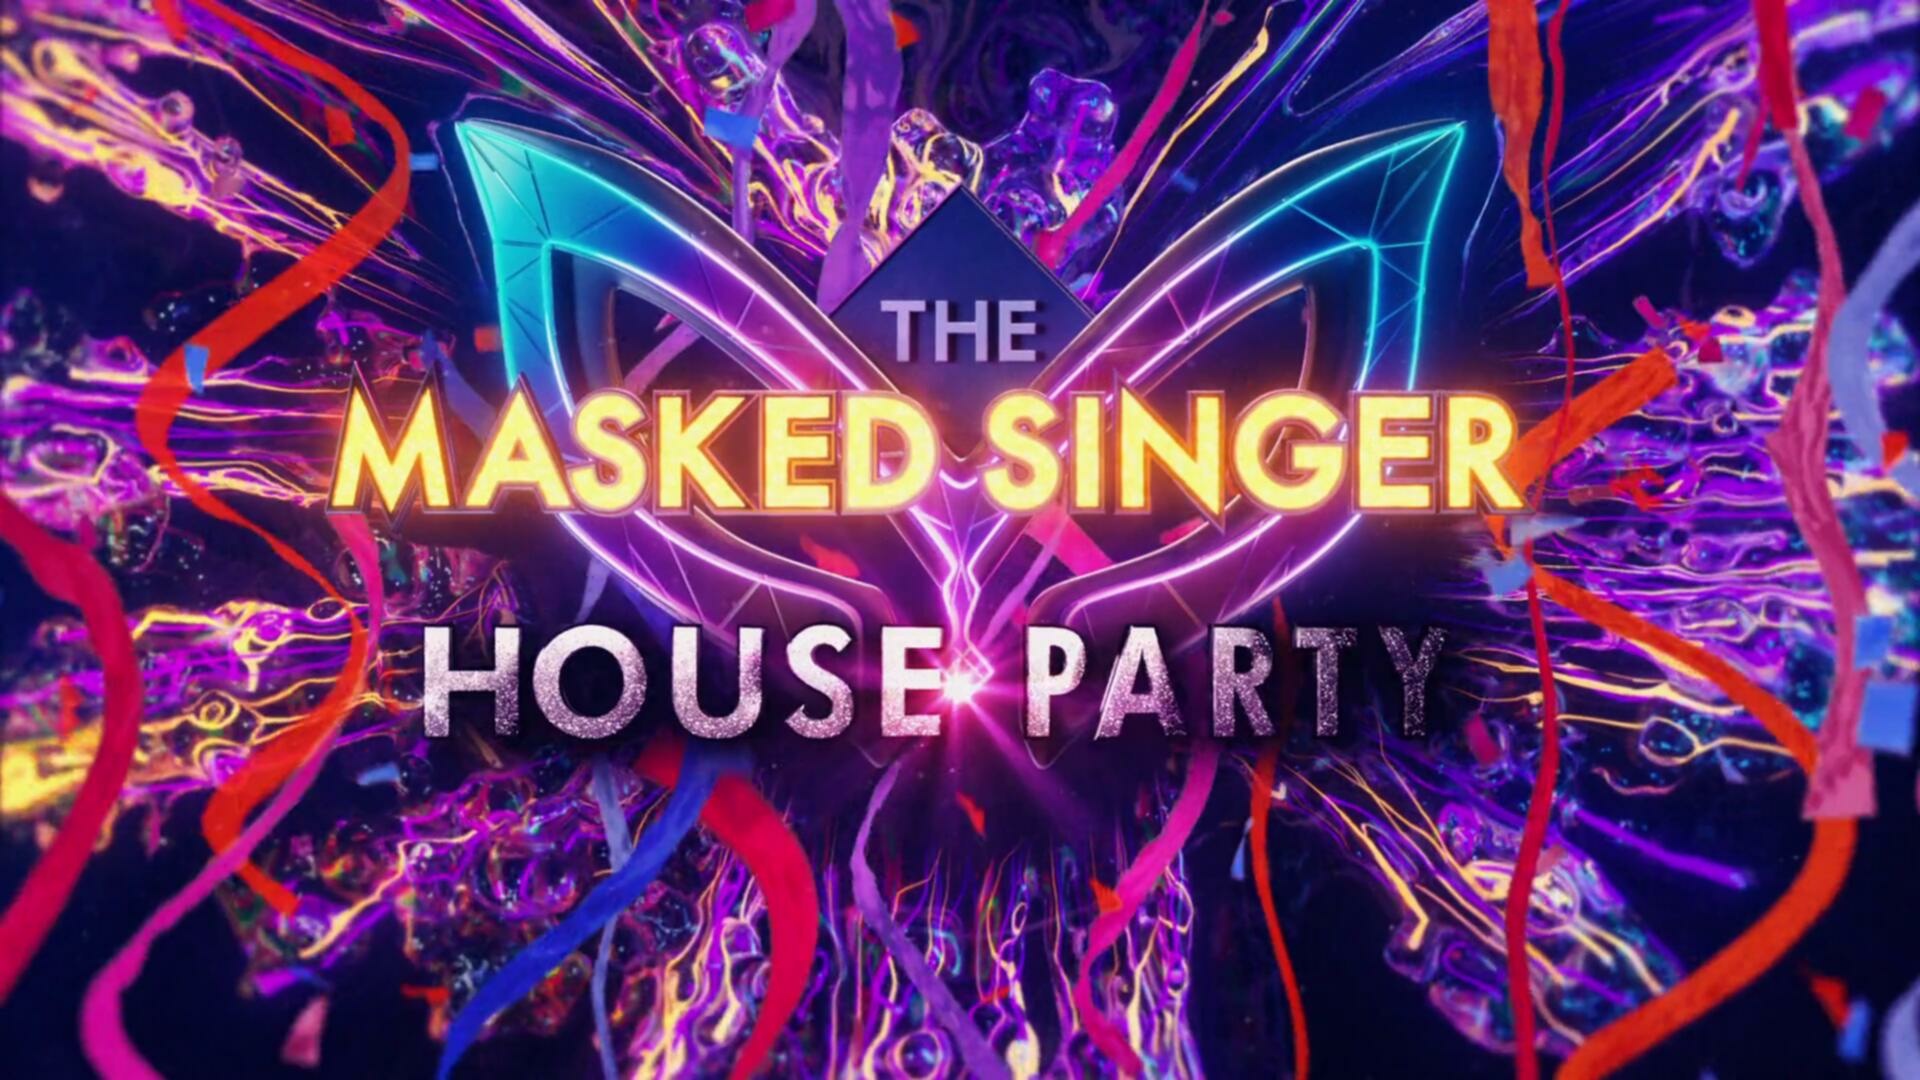 The Masked Singer S06E04 House Party 1080p HULU WEB DL DDP5 1 H 264 NTb TGx